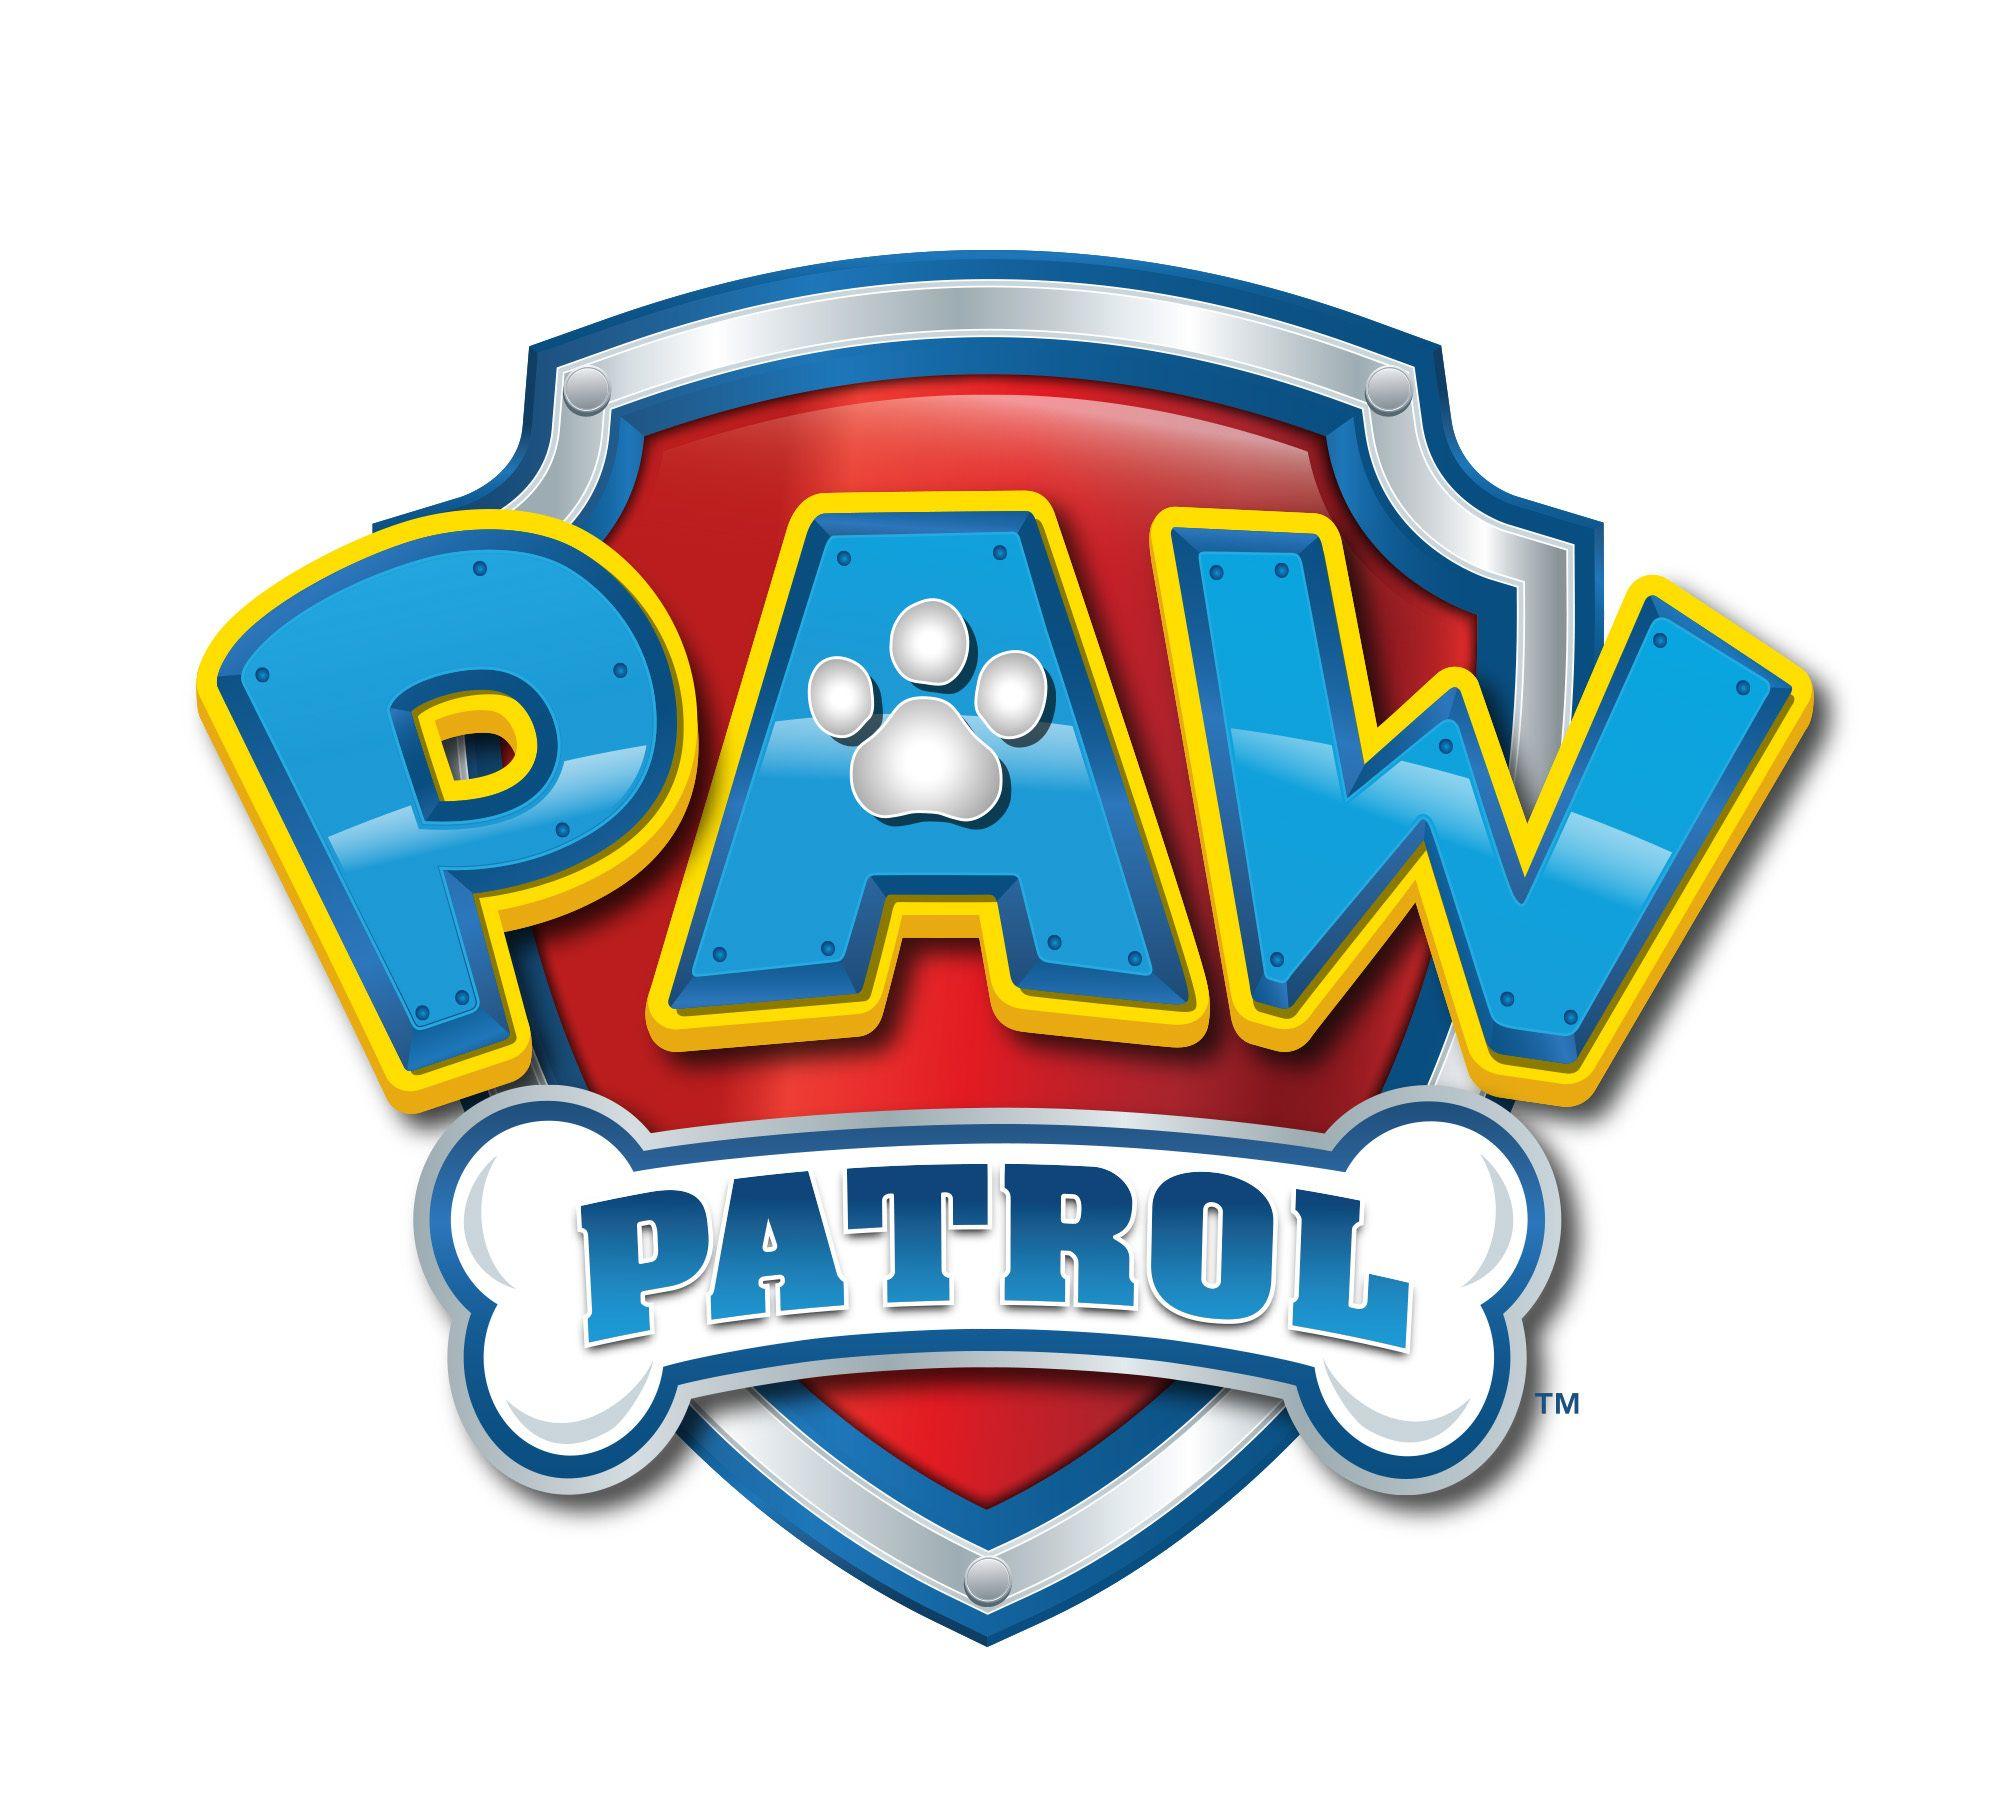 Blue Paw Patrol Logo - Nickelodeon's Courageous PAW Patrol Pups Team Up With Real Life